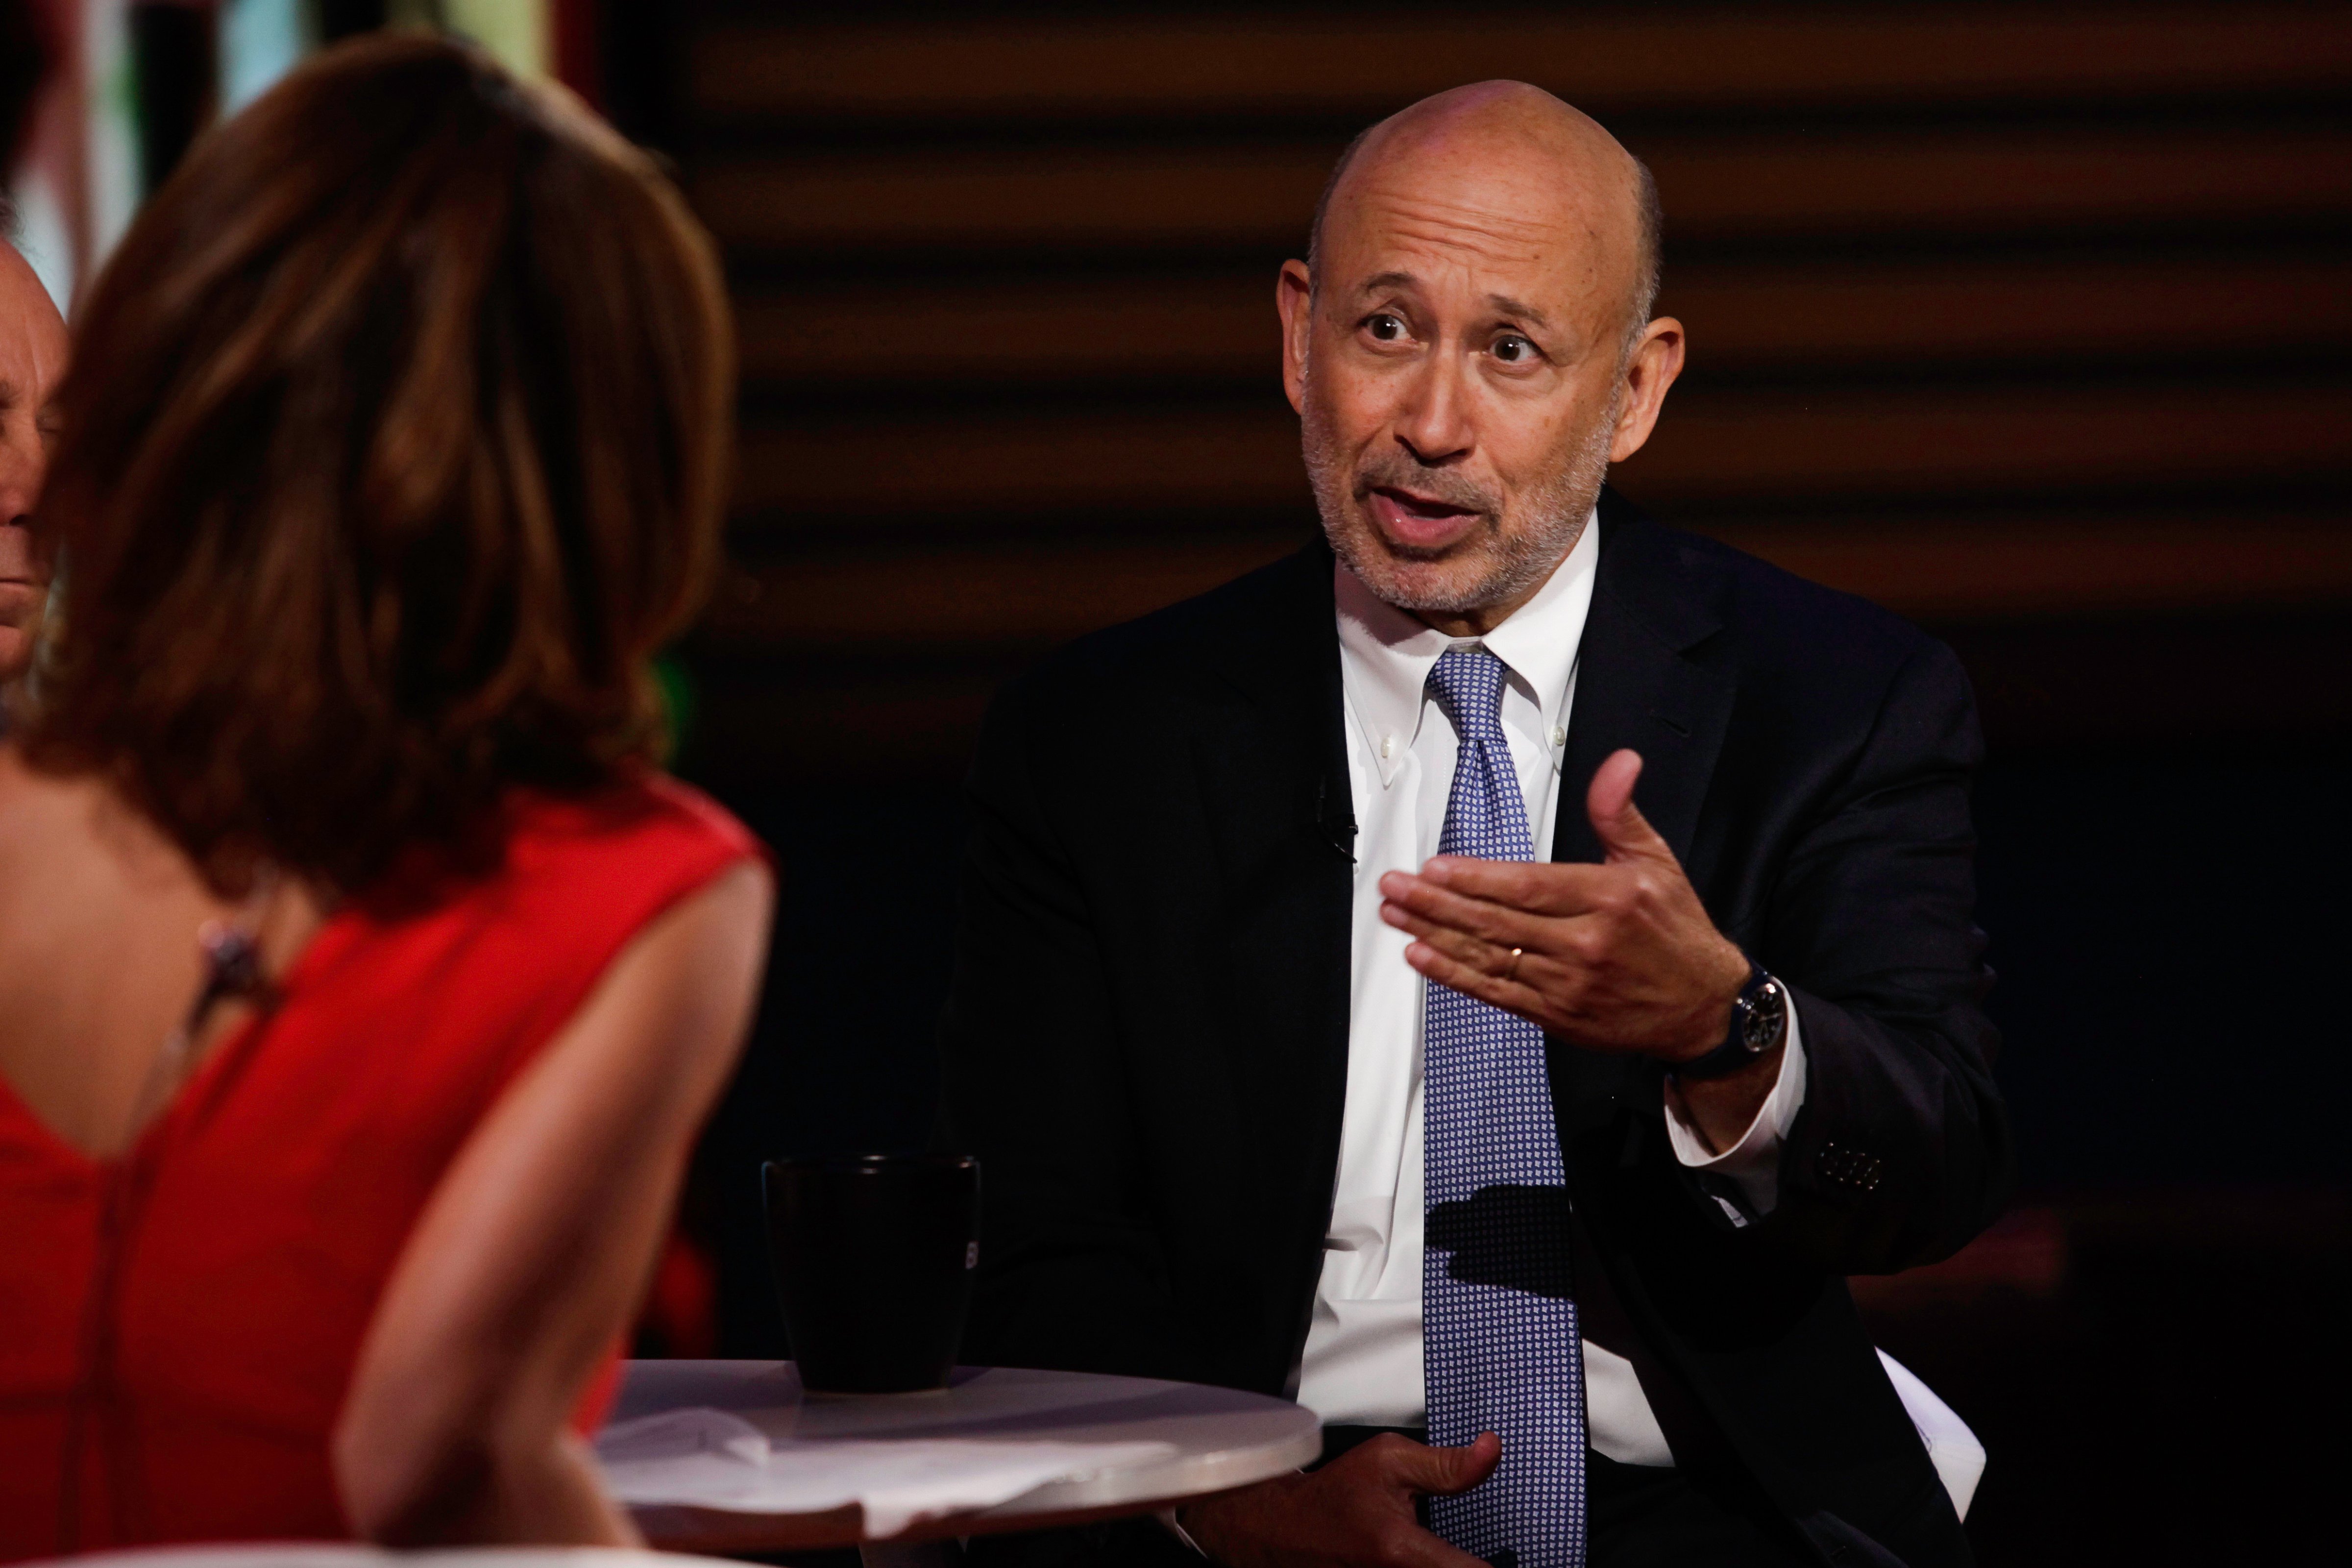 Lloyd Blankfein,  CEO of Goldman Sachs Group, is photographed during a TV interview in the Bloomberg Offices in New York, U.S., on,  July 29, 2015 (Chris Goodney—Bloomberg Finance LP)